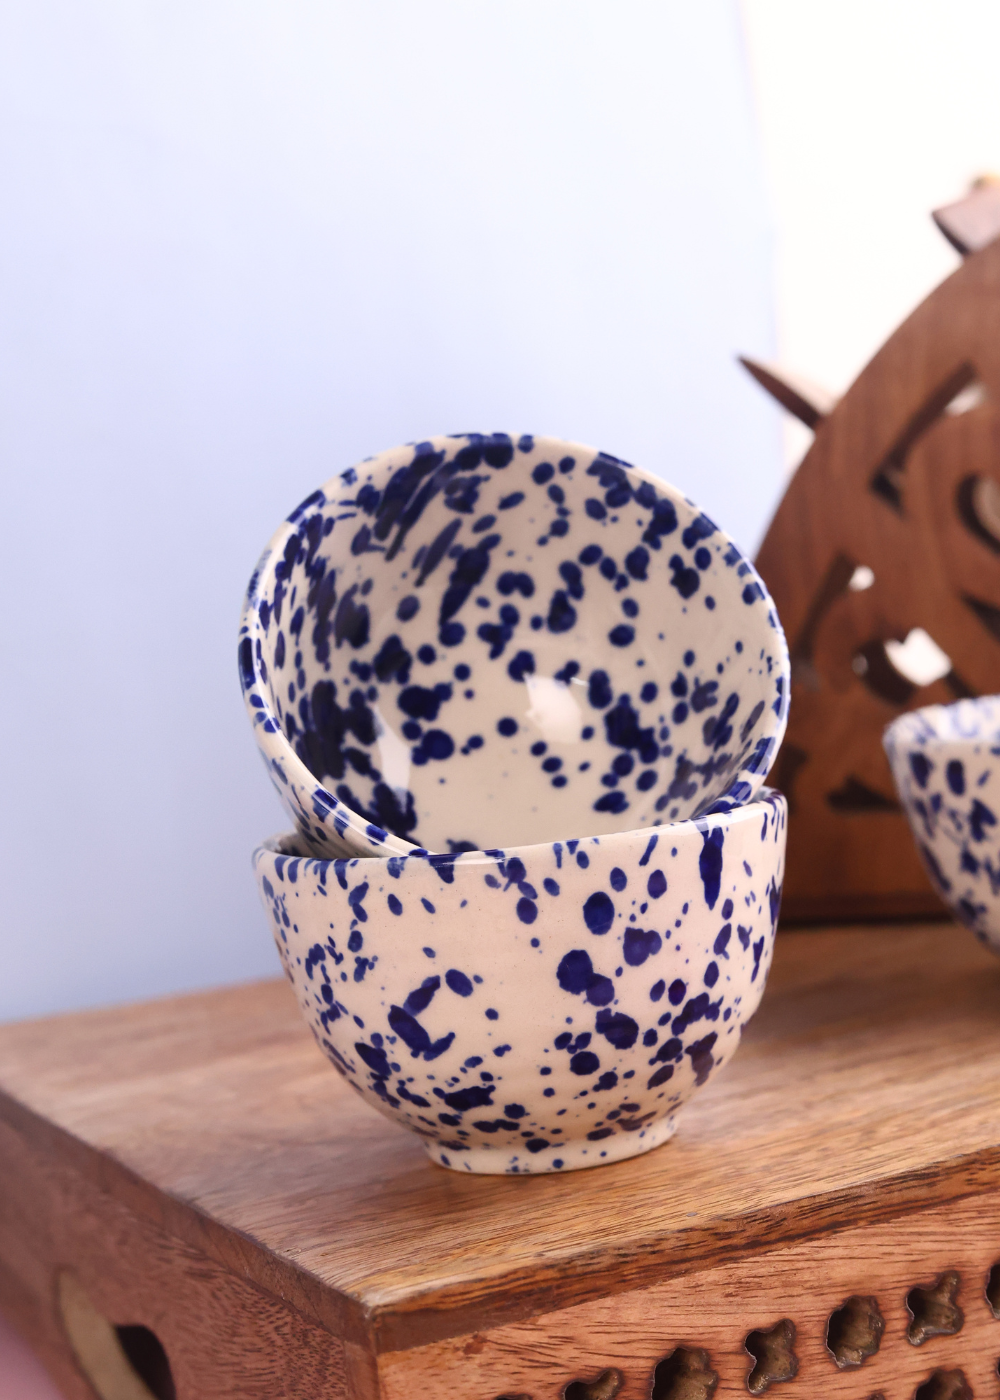 Blue flecked bowls on each other